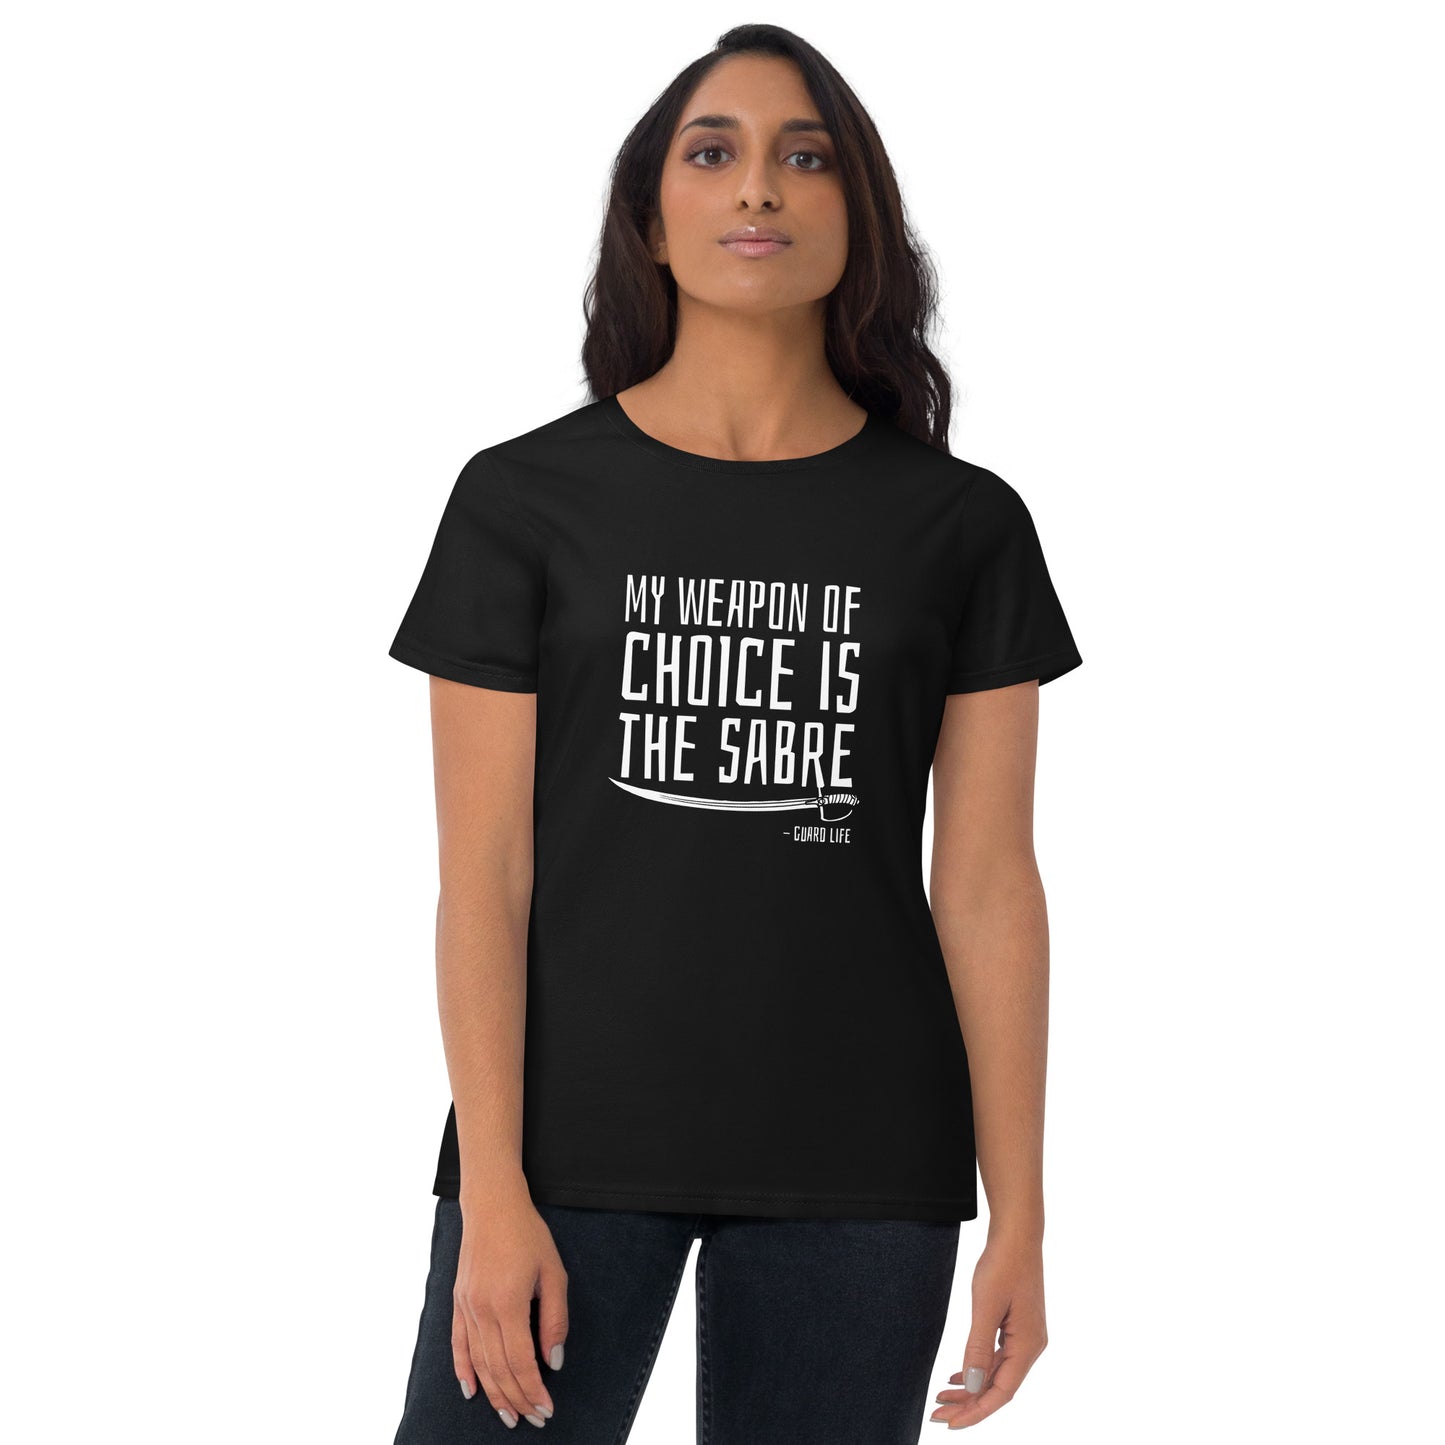 My weapon of choice is the Sabre (Color Guard) Women's Fashion Fit T-shirt